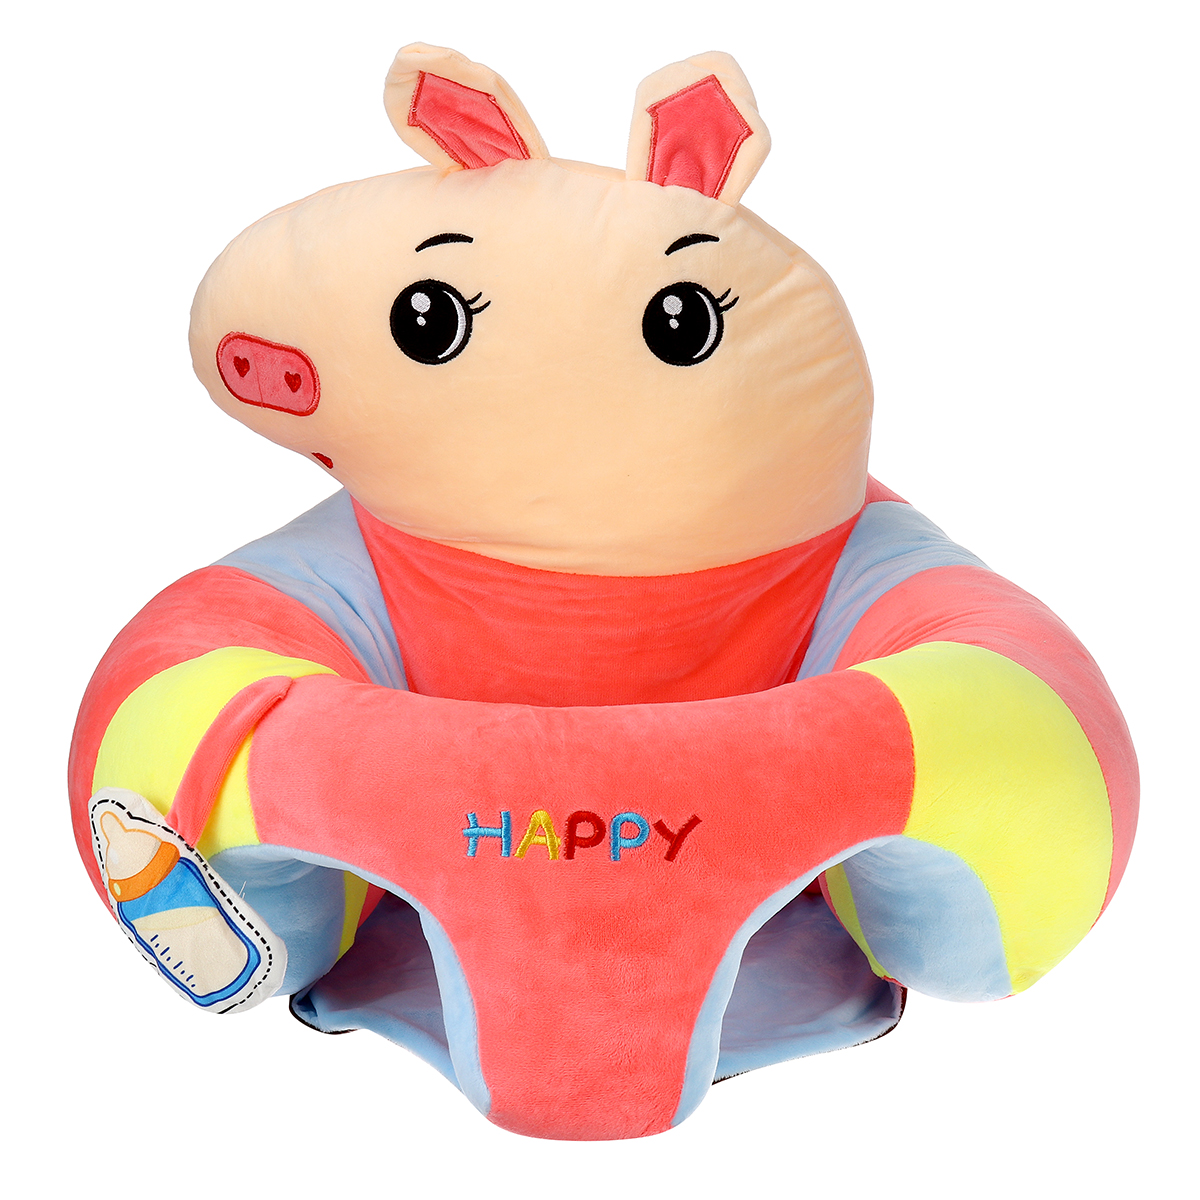 Multi-Style-Kids-Baby-Support-Seats-Sit-Up-Soft-Chair-Sofa-Cartoon-Animal-Kids-Learning-To-Sit-Plush-1817560-6